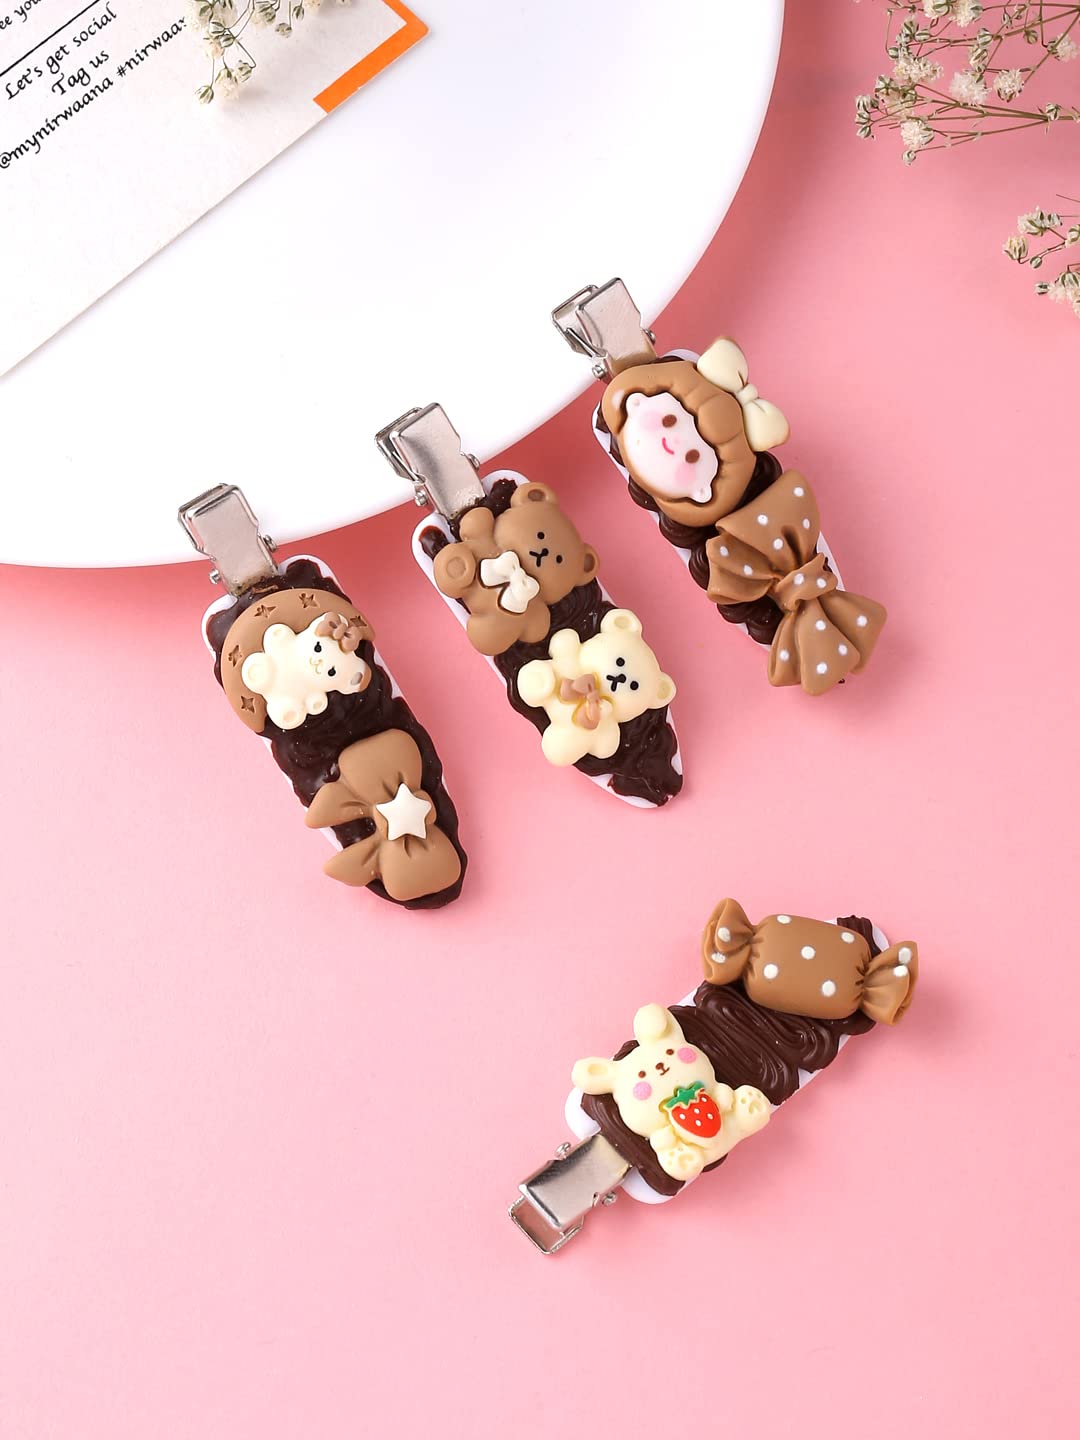 Melbees by Yellow Chimes Hair Clips for Girls 3 Pcs Hairclip Cute Teddy Bear Hair Clips for Girls Alligator Hair Clip for Kids and Girls Hair Accessories.